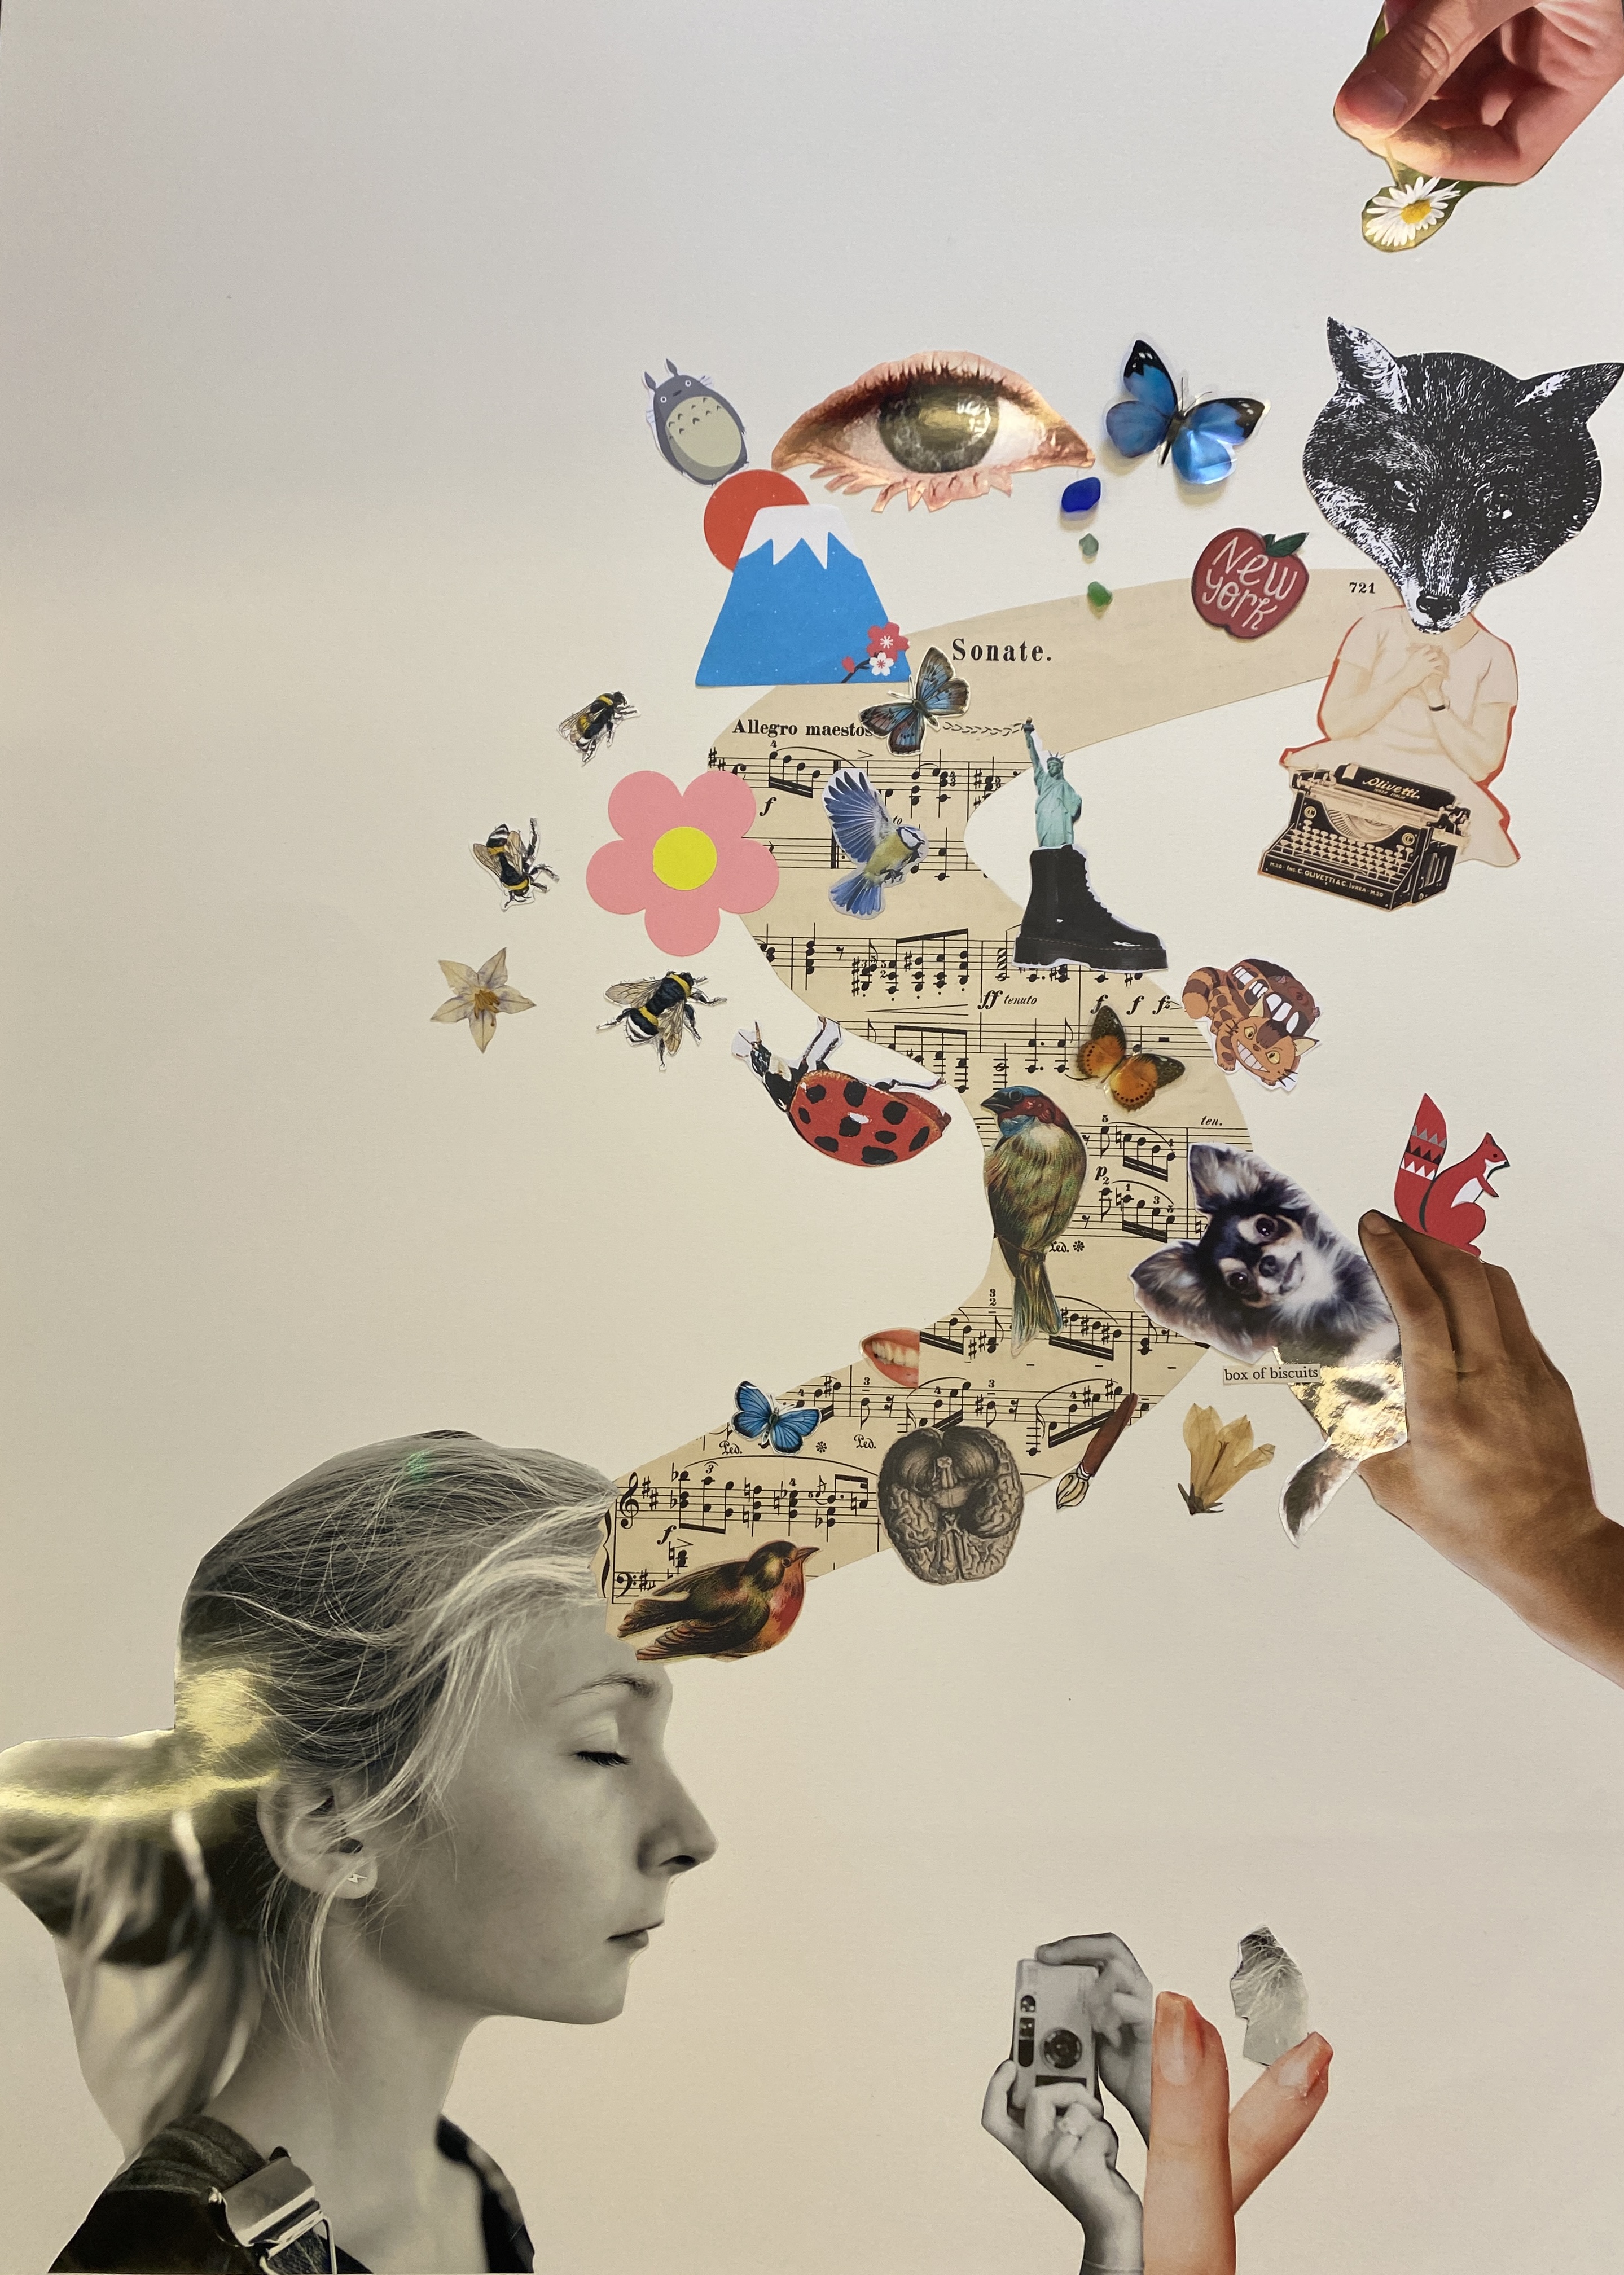 Art of a girl with a collage of items floating out of her head